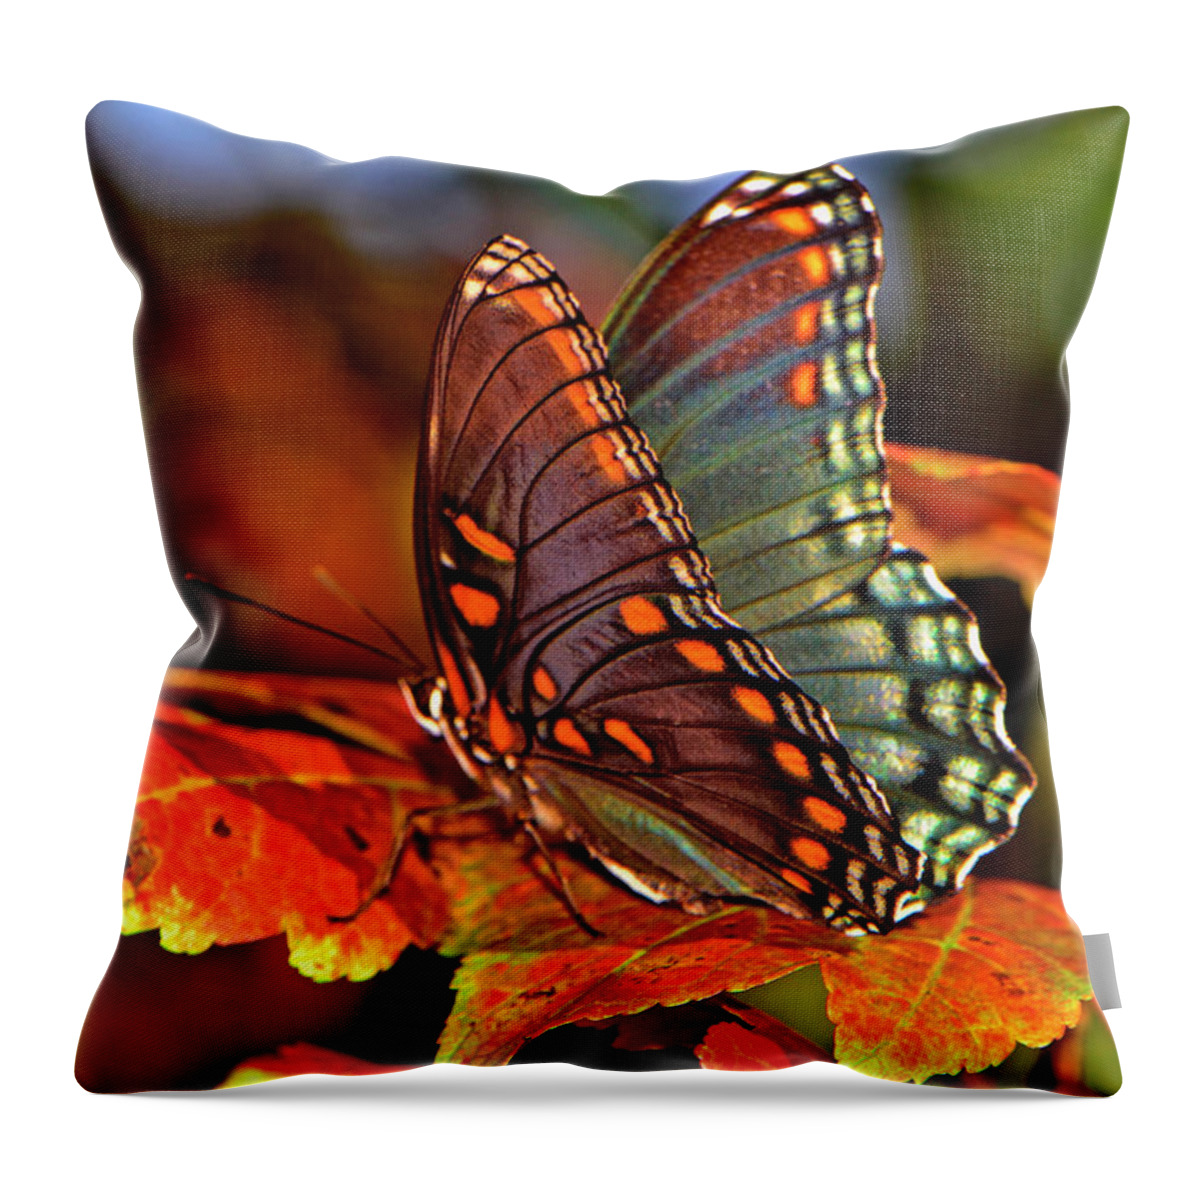 Insect Throw Pillow featuring the photograph Colorful Butterfly On The Autumn Leaves 002 by George Bostian